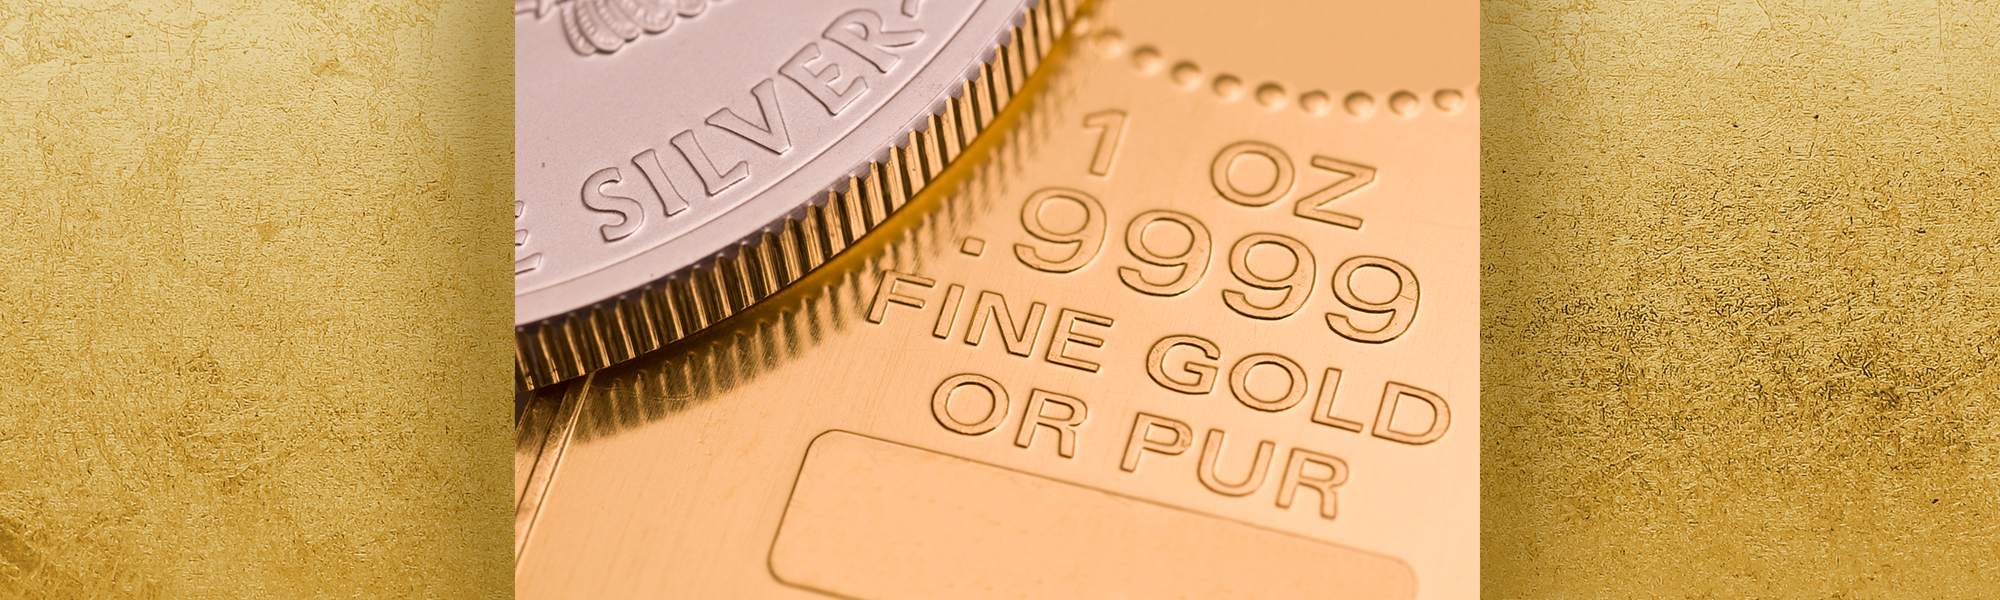 Which to Choose: Gold or Silver? (and does it matter?)